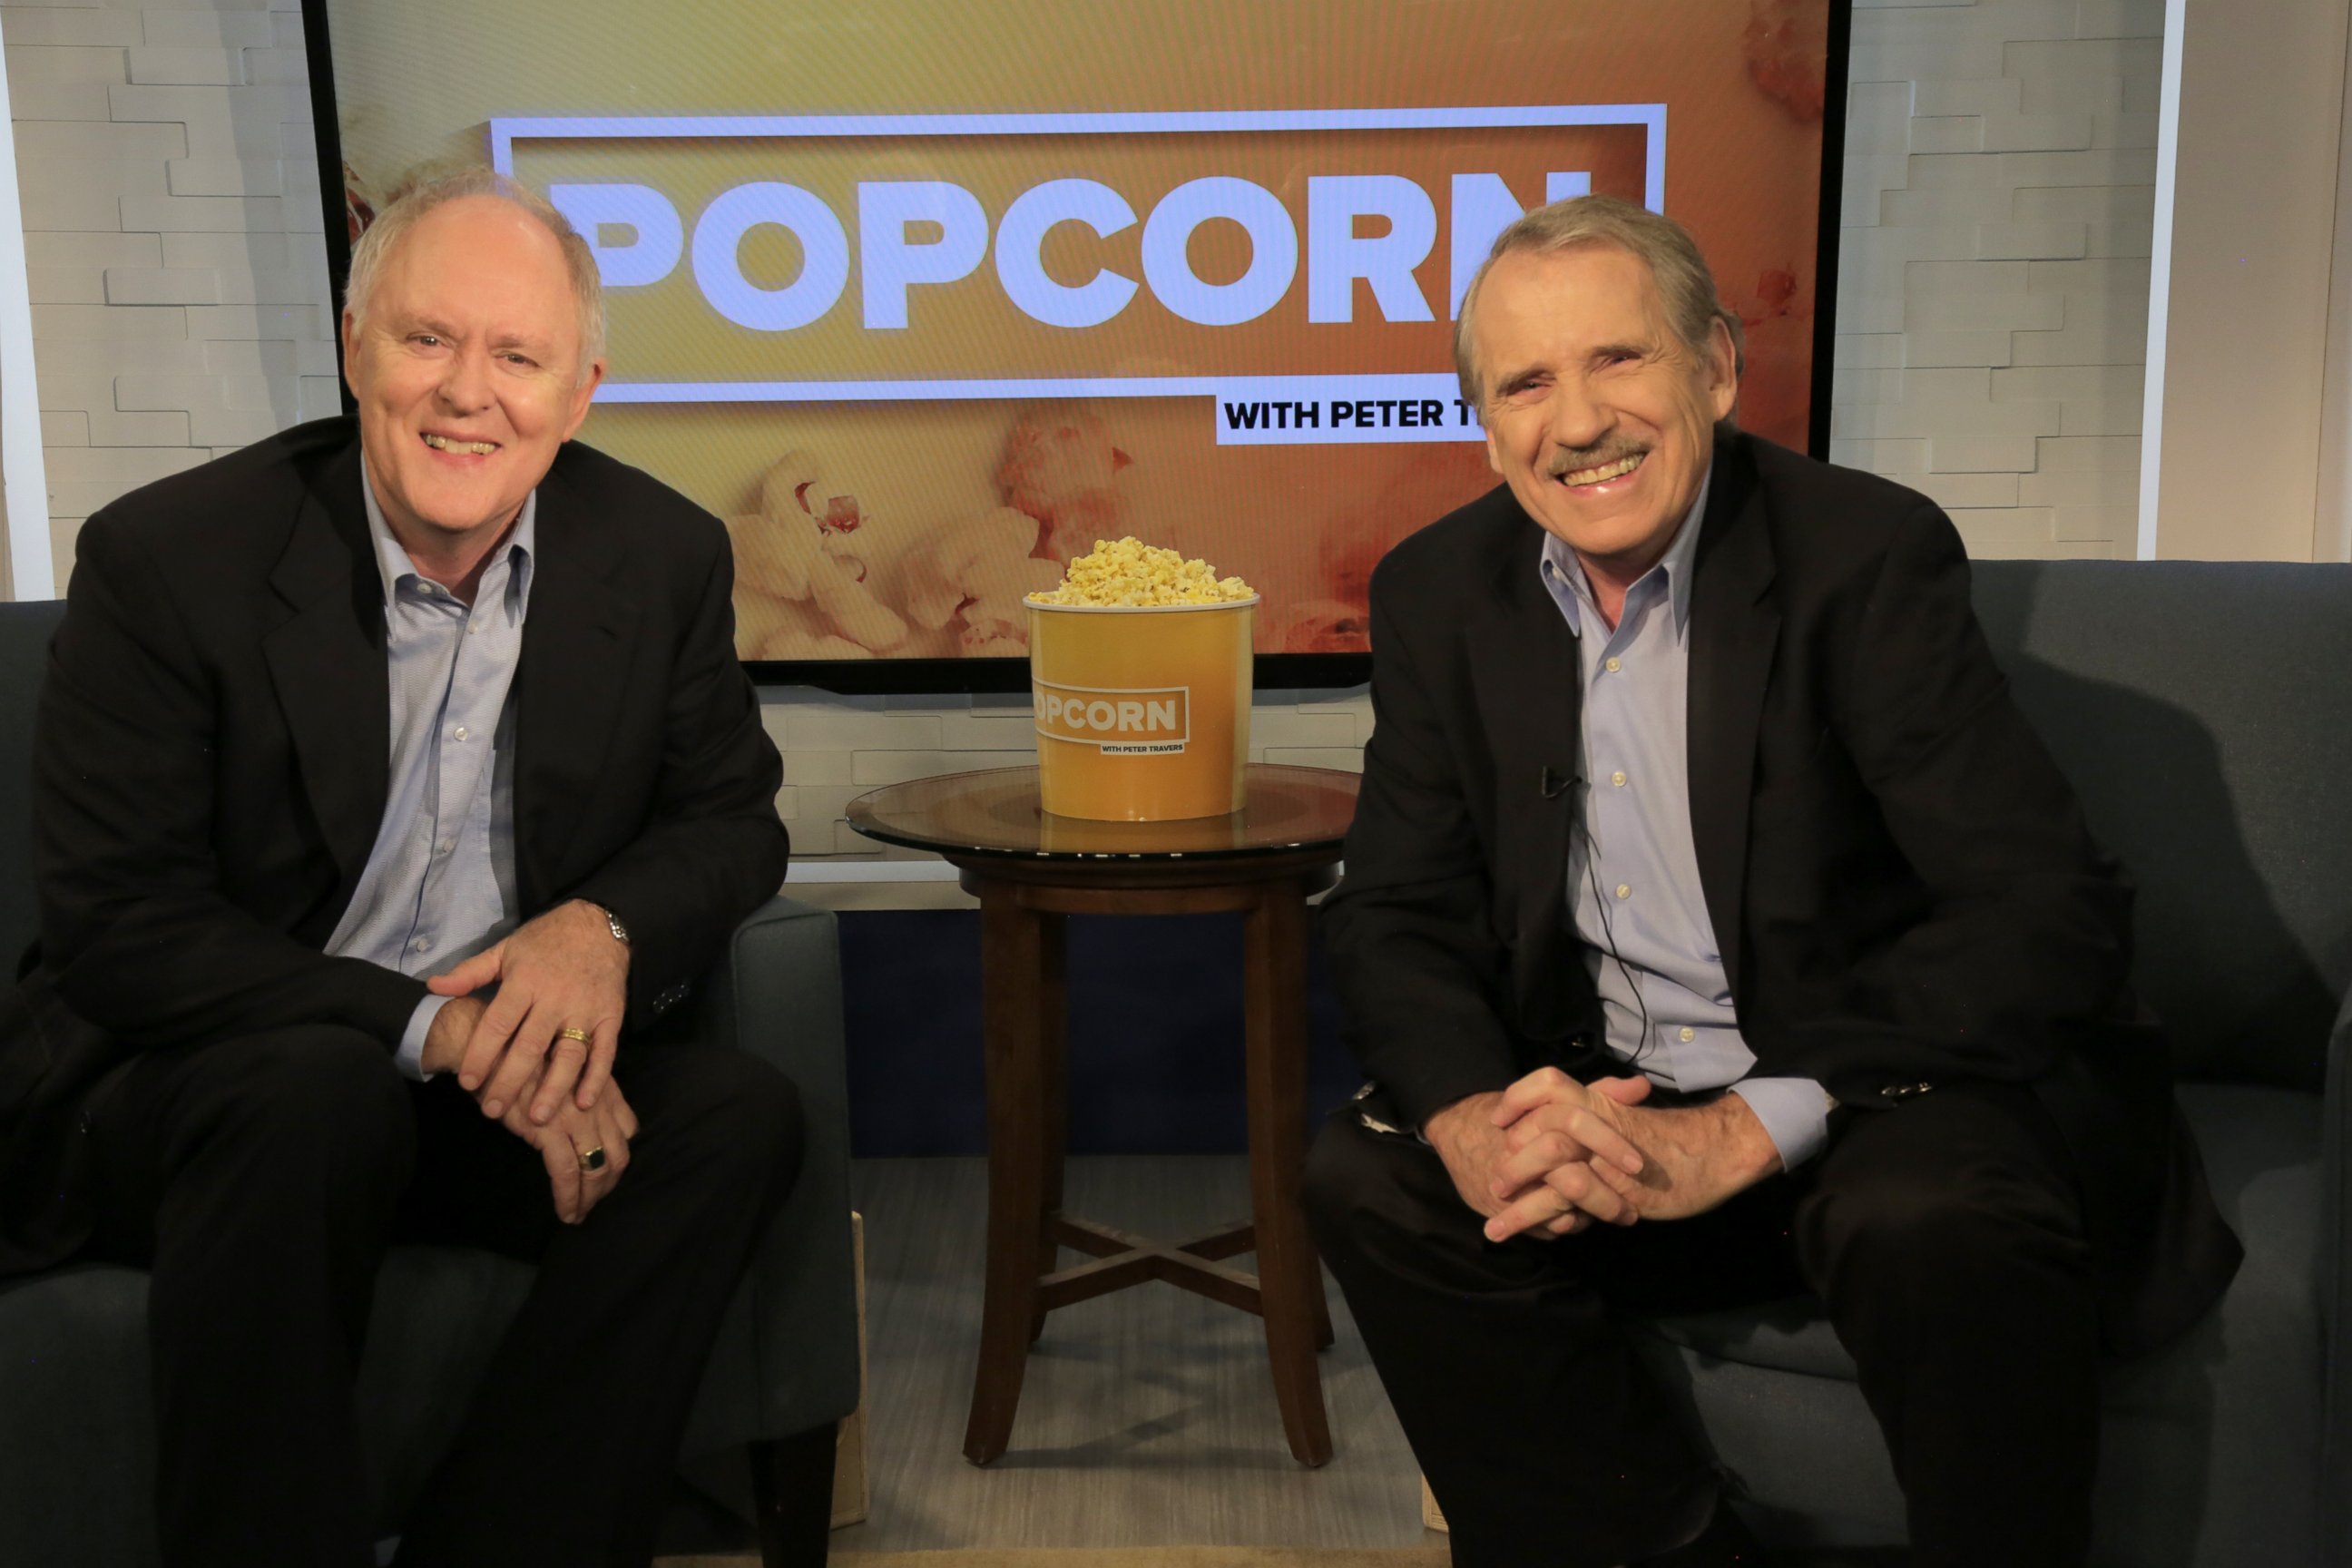 PHOTO: John Lithgow appeared on "Popcorn with Peter Travers" at the ABC studios in New York, Oct. 25, 2016.